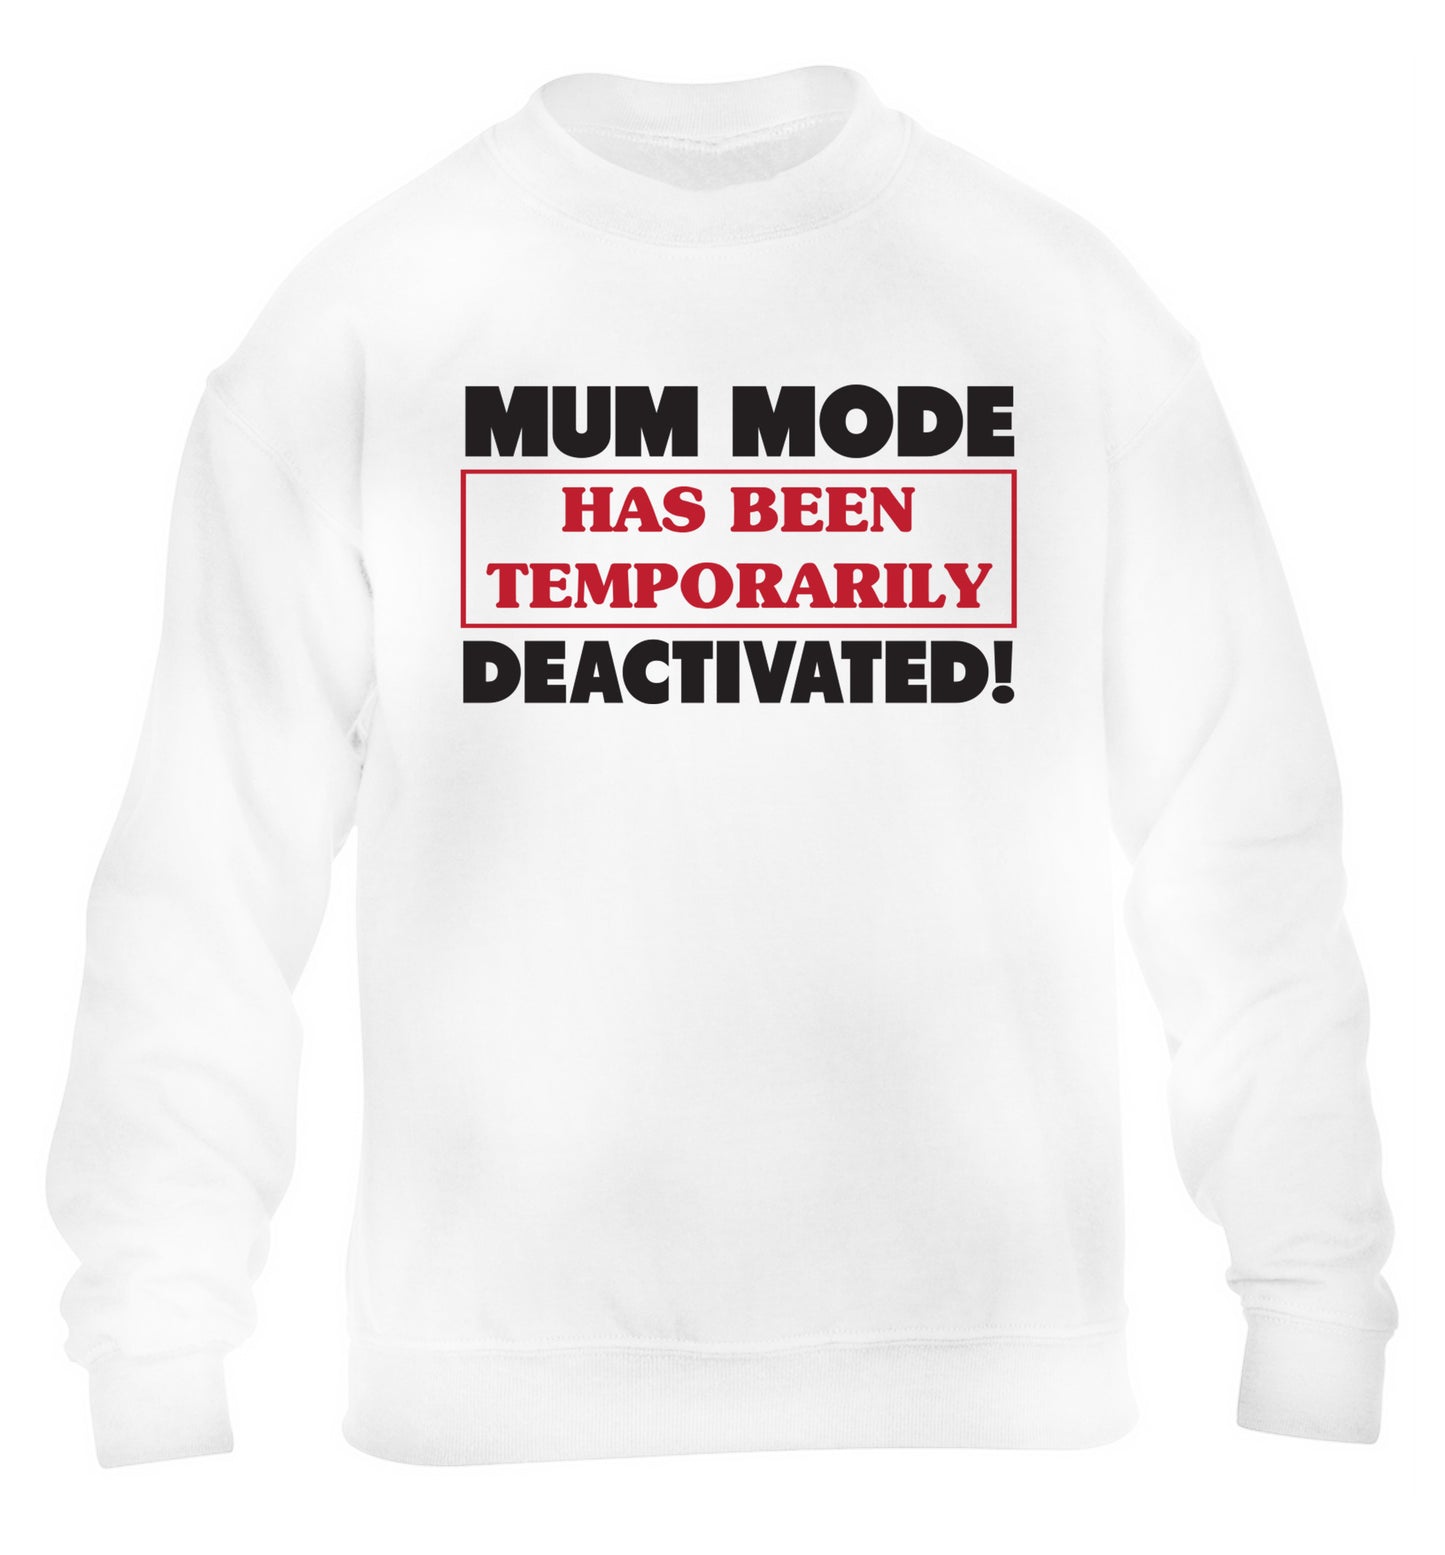 Mum mode has been temporarily deactivated! children's white sweater 12-13 Years